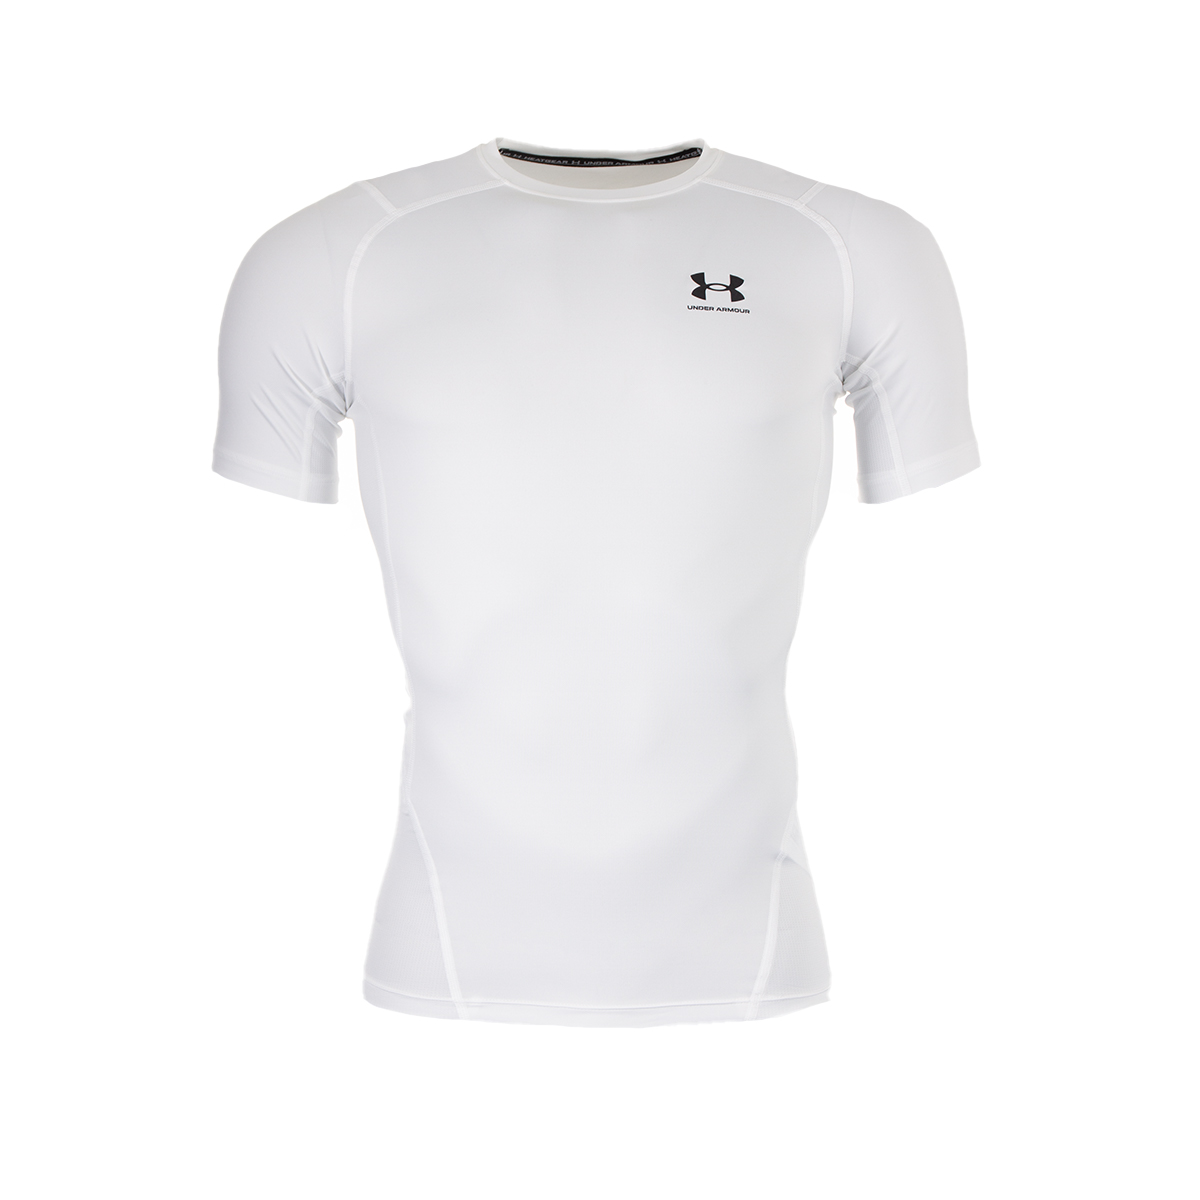 Mens Under Armour Heatgear Compression Top - White Short Sleeved